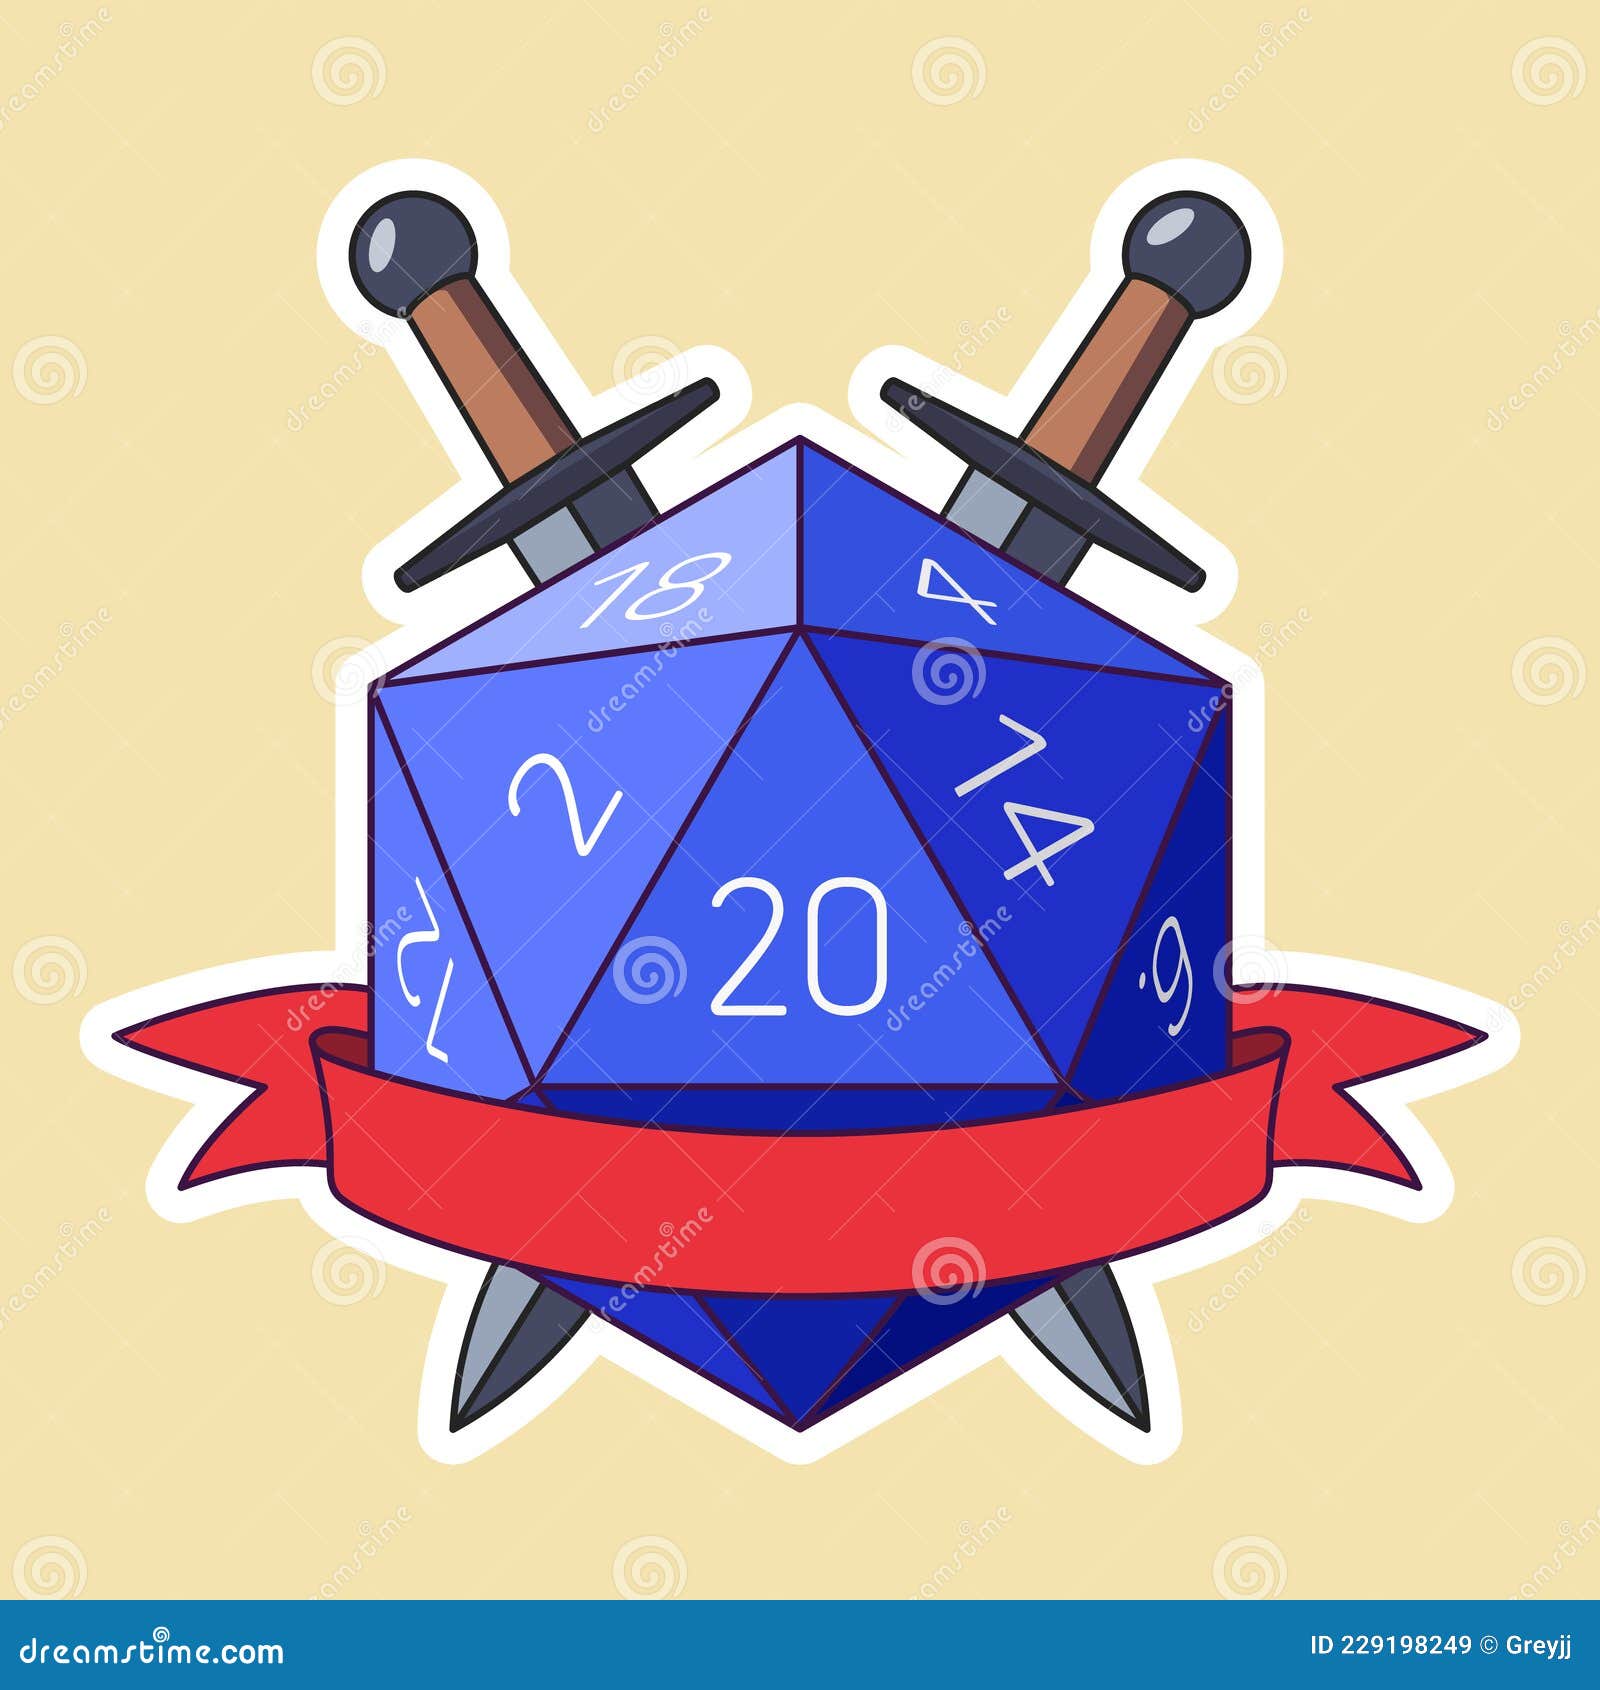 blue d20 die with red ribbon and swords. colored outline style